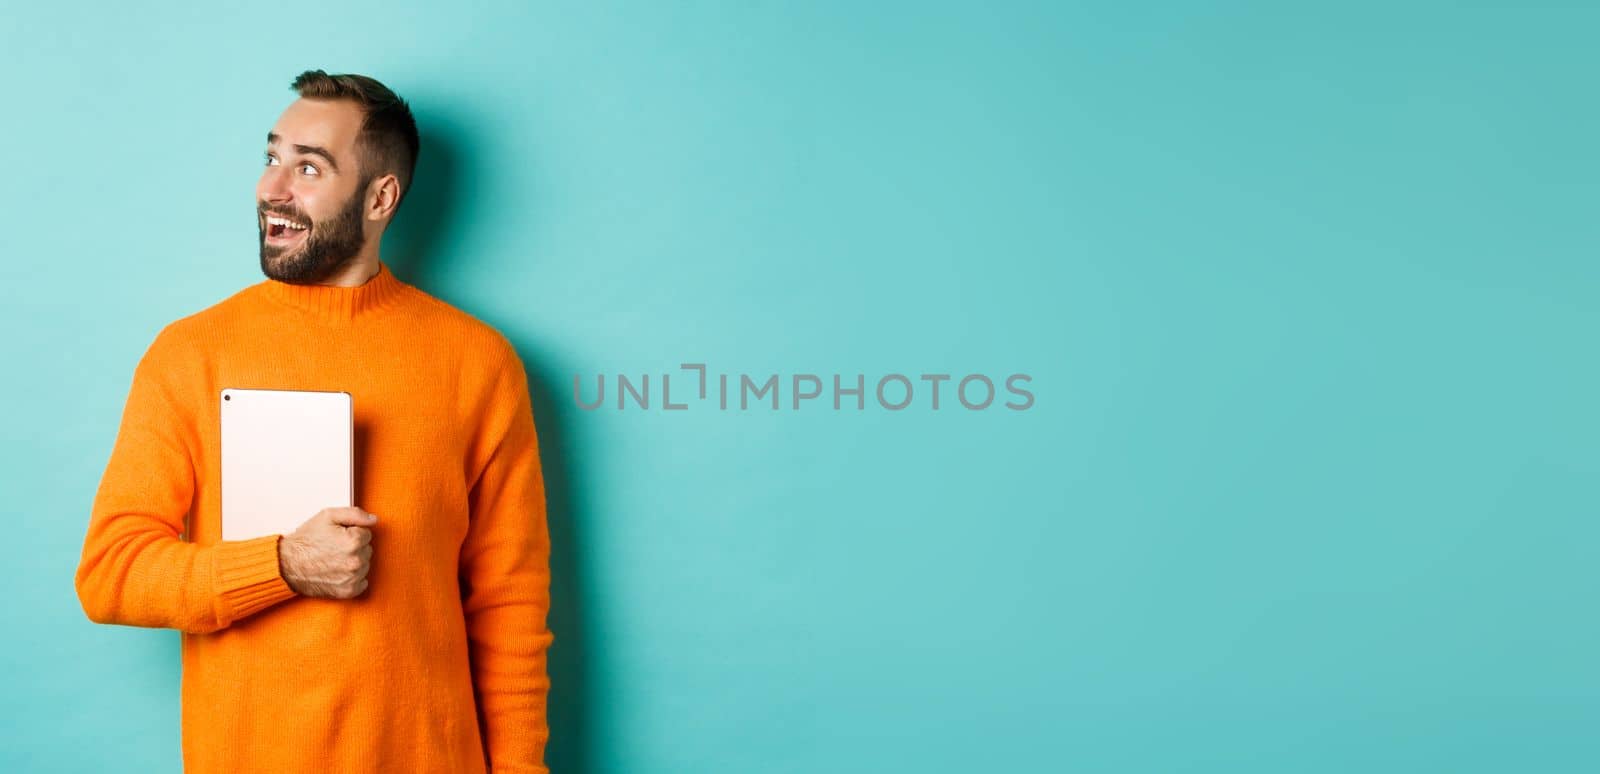 Handsome man holding laptop, looking left with surprise and amazement, standing in orange sweater against light blue background.